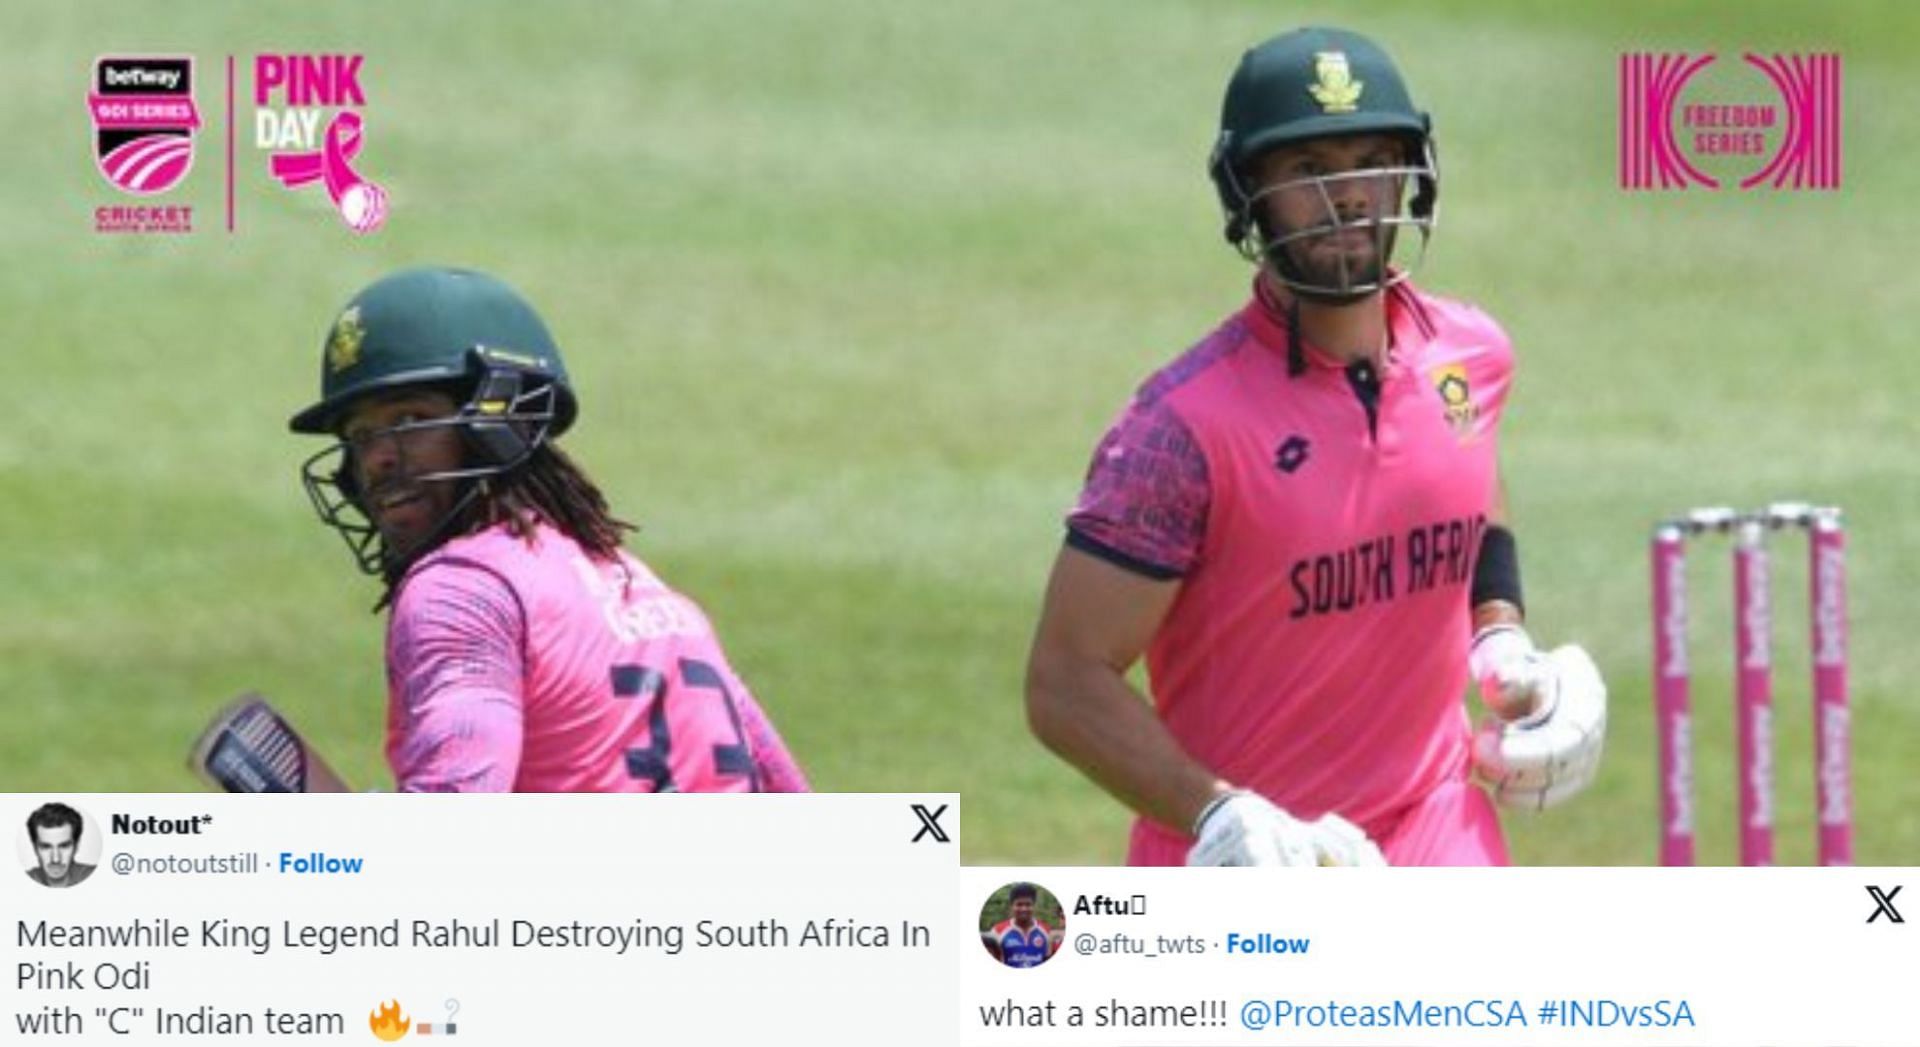 South Africa’s Defeat to India Sparks Disappointment Among Fans